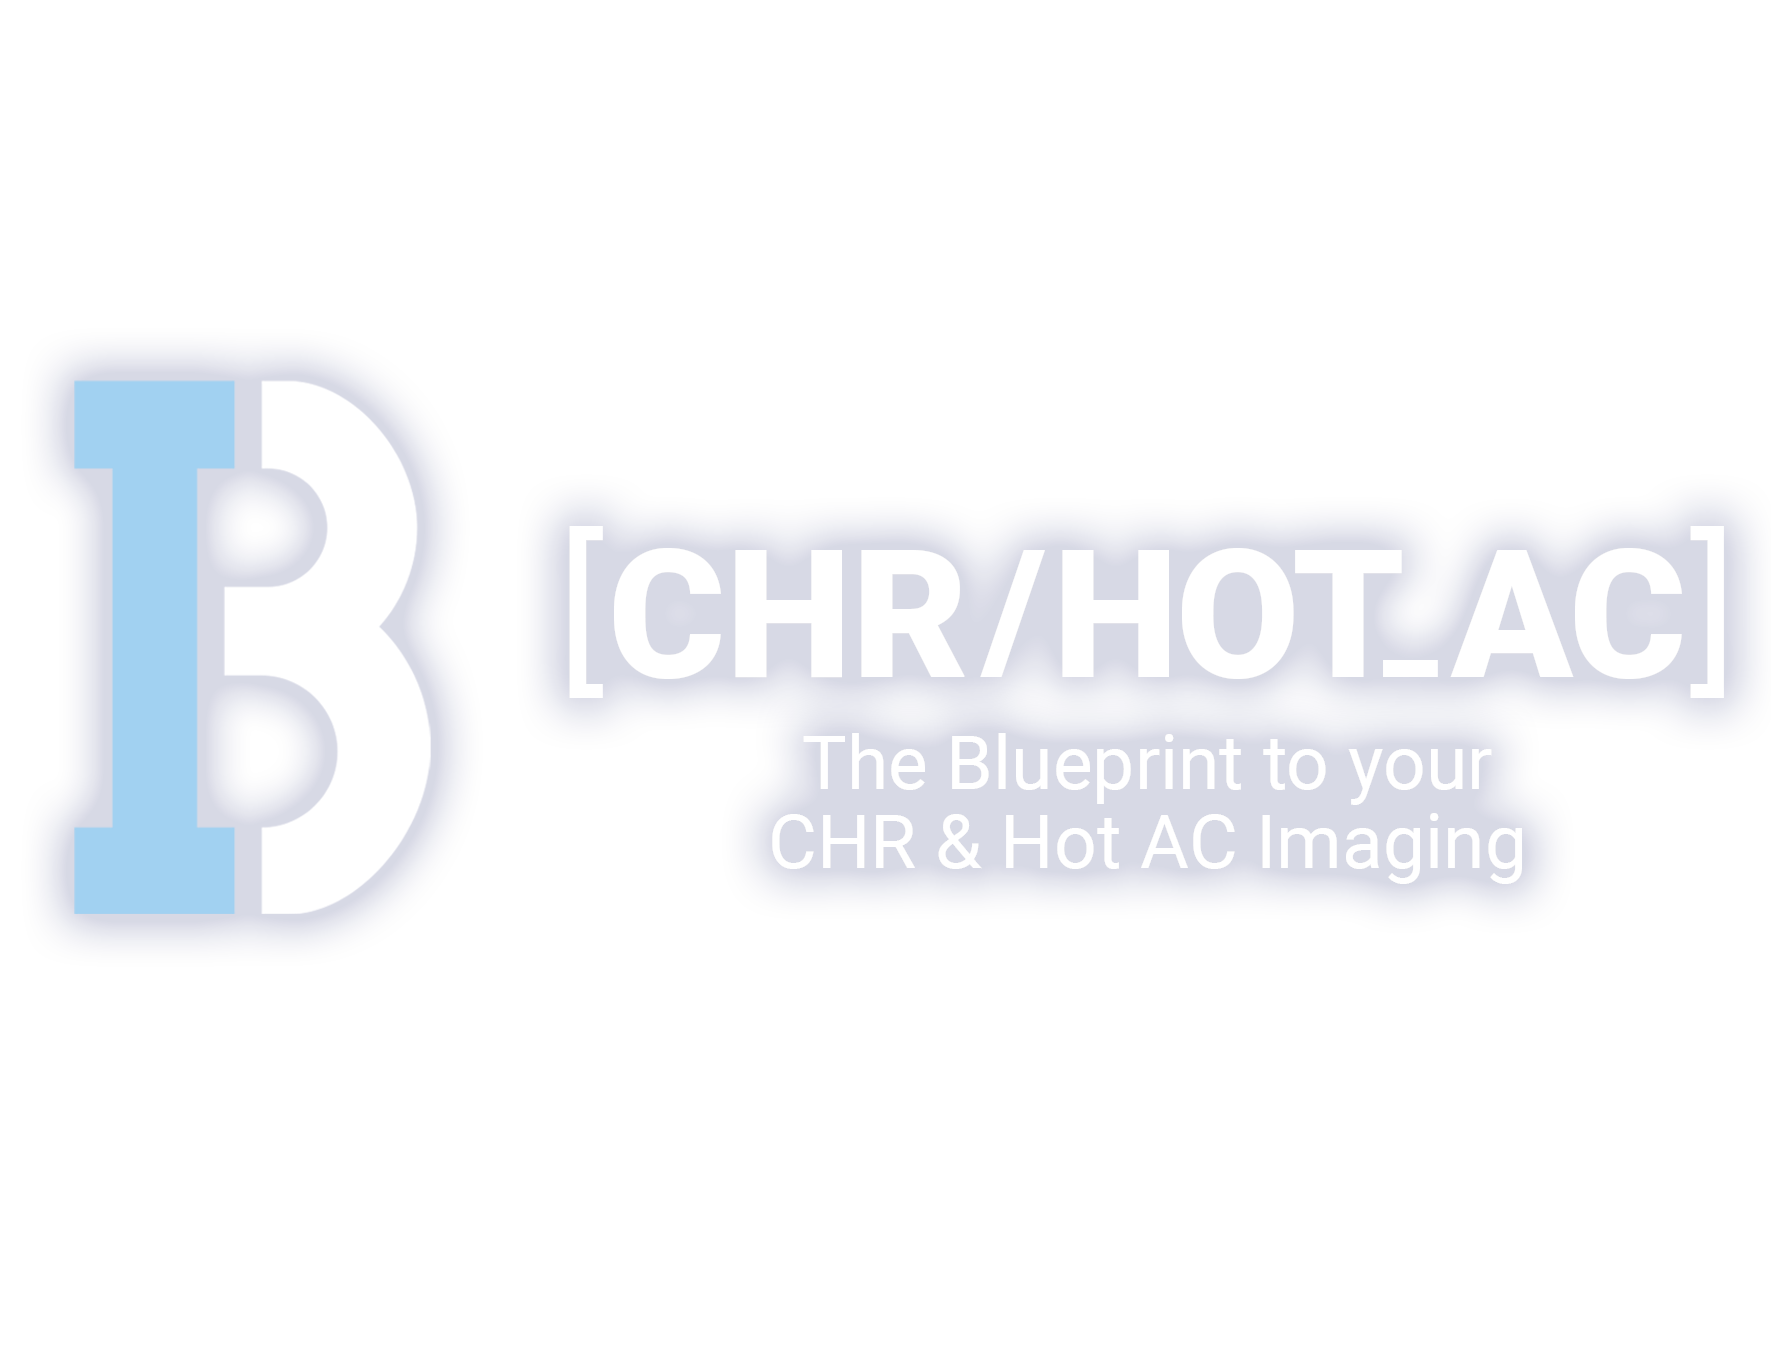 CHR / Hot AC - The Blueprint to your CHR & Hot AC Imaging